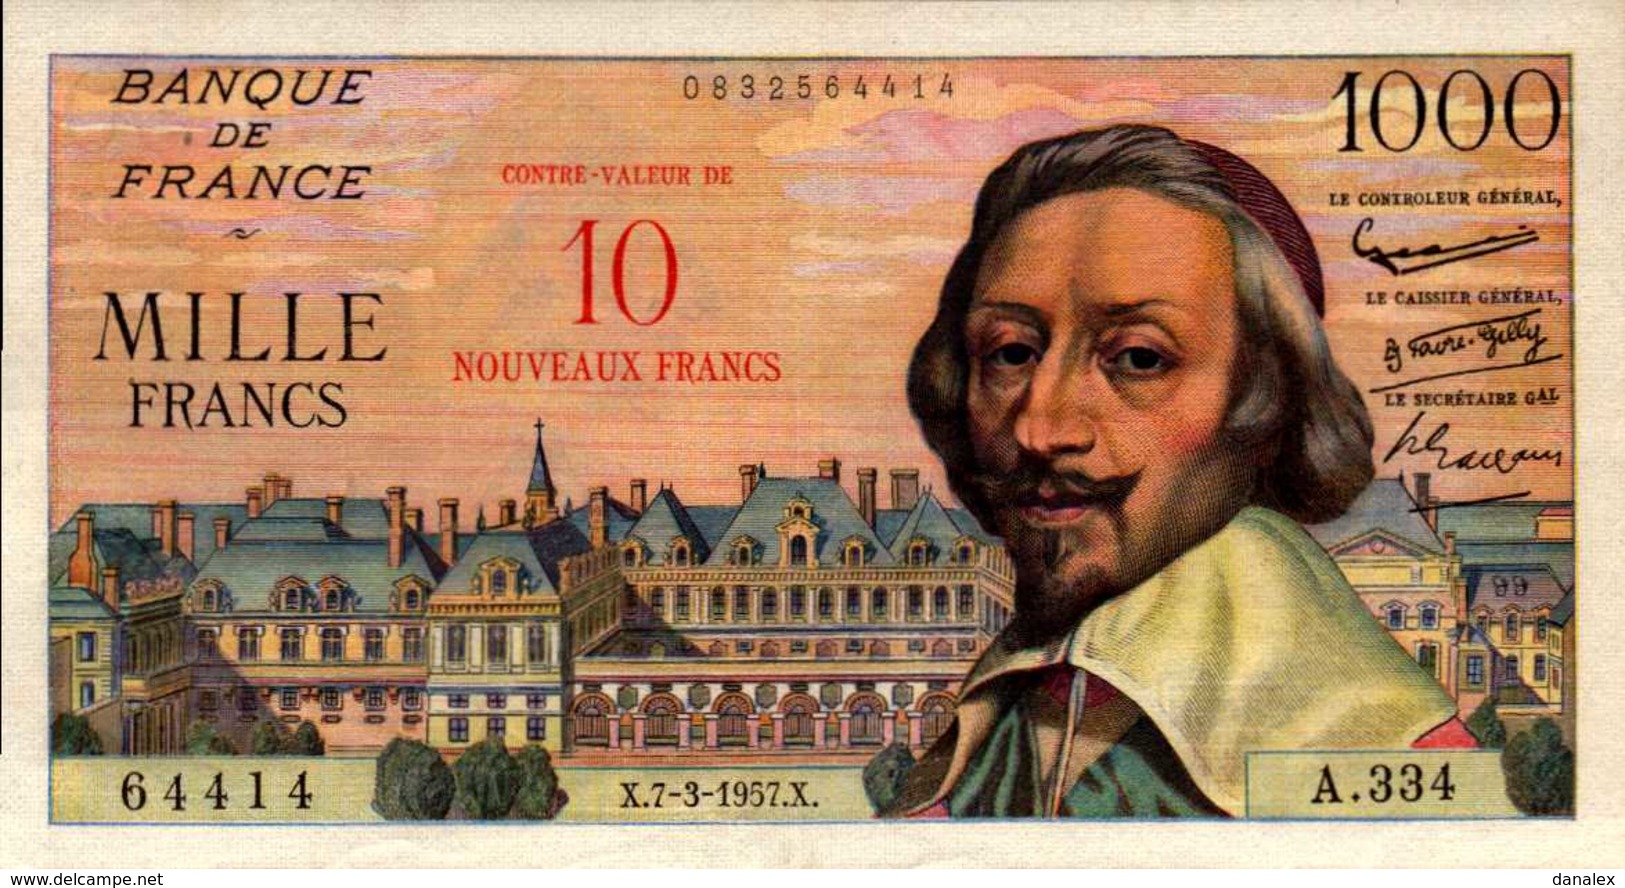 FRANCE 1000 FRANCS RICHELIEU SURCHARGE Du 7-3-1957 Pick 138  F 53/1  XF/SUP+ - 1955-1959 Sovraccarichi In Nuovi Franchi